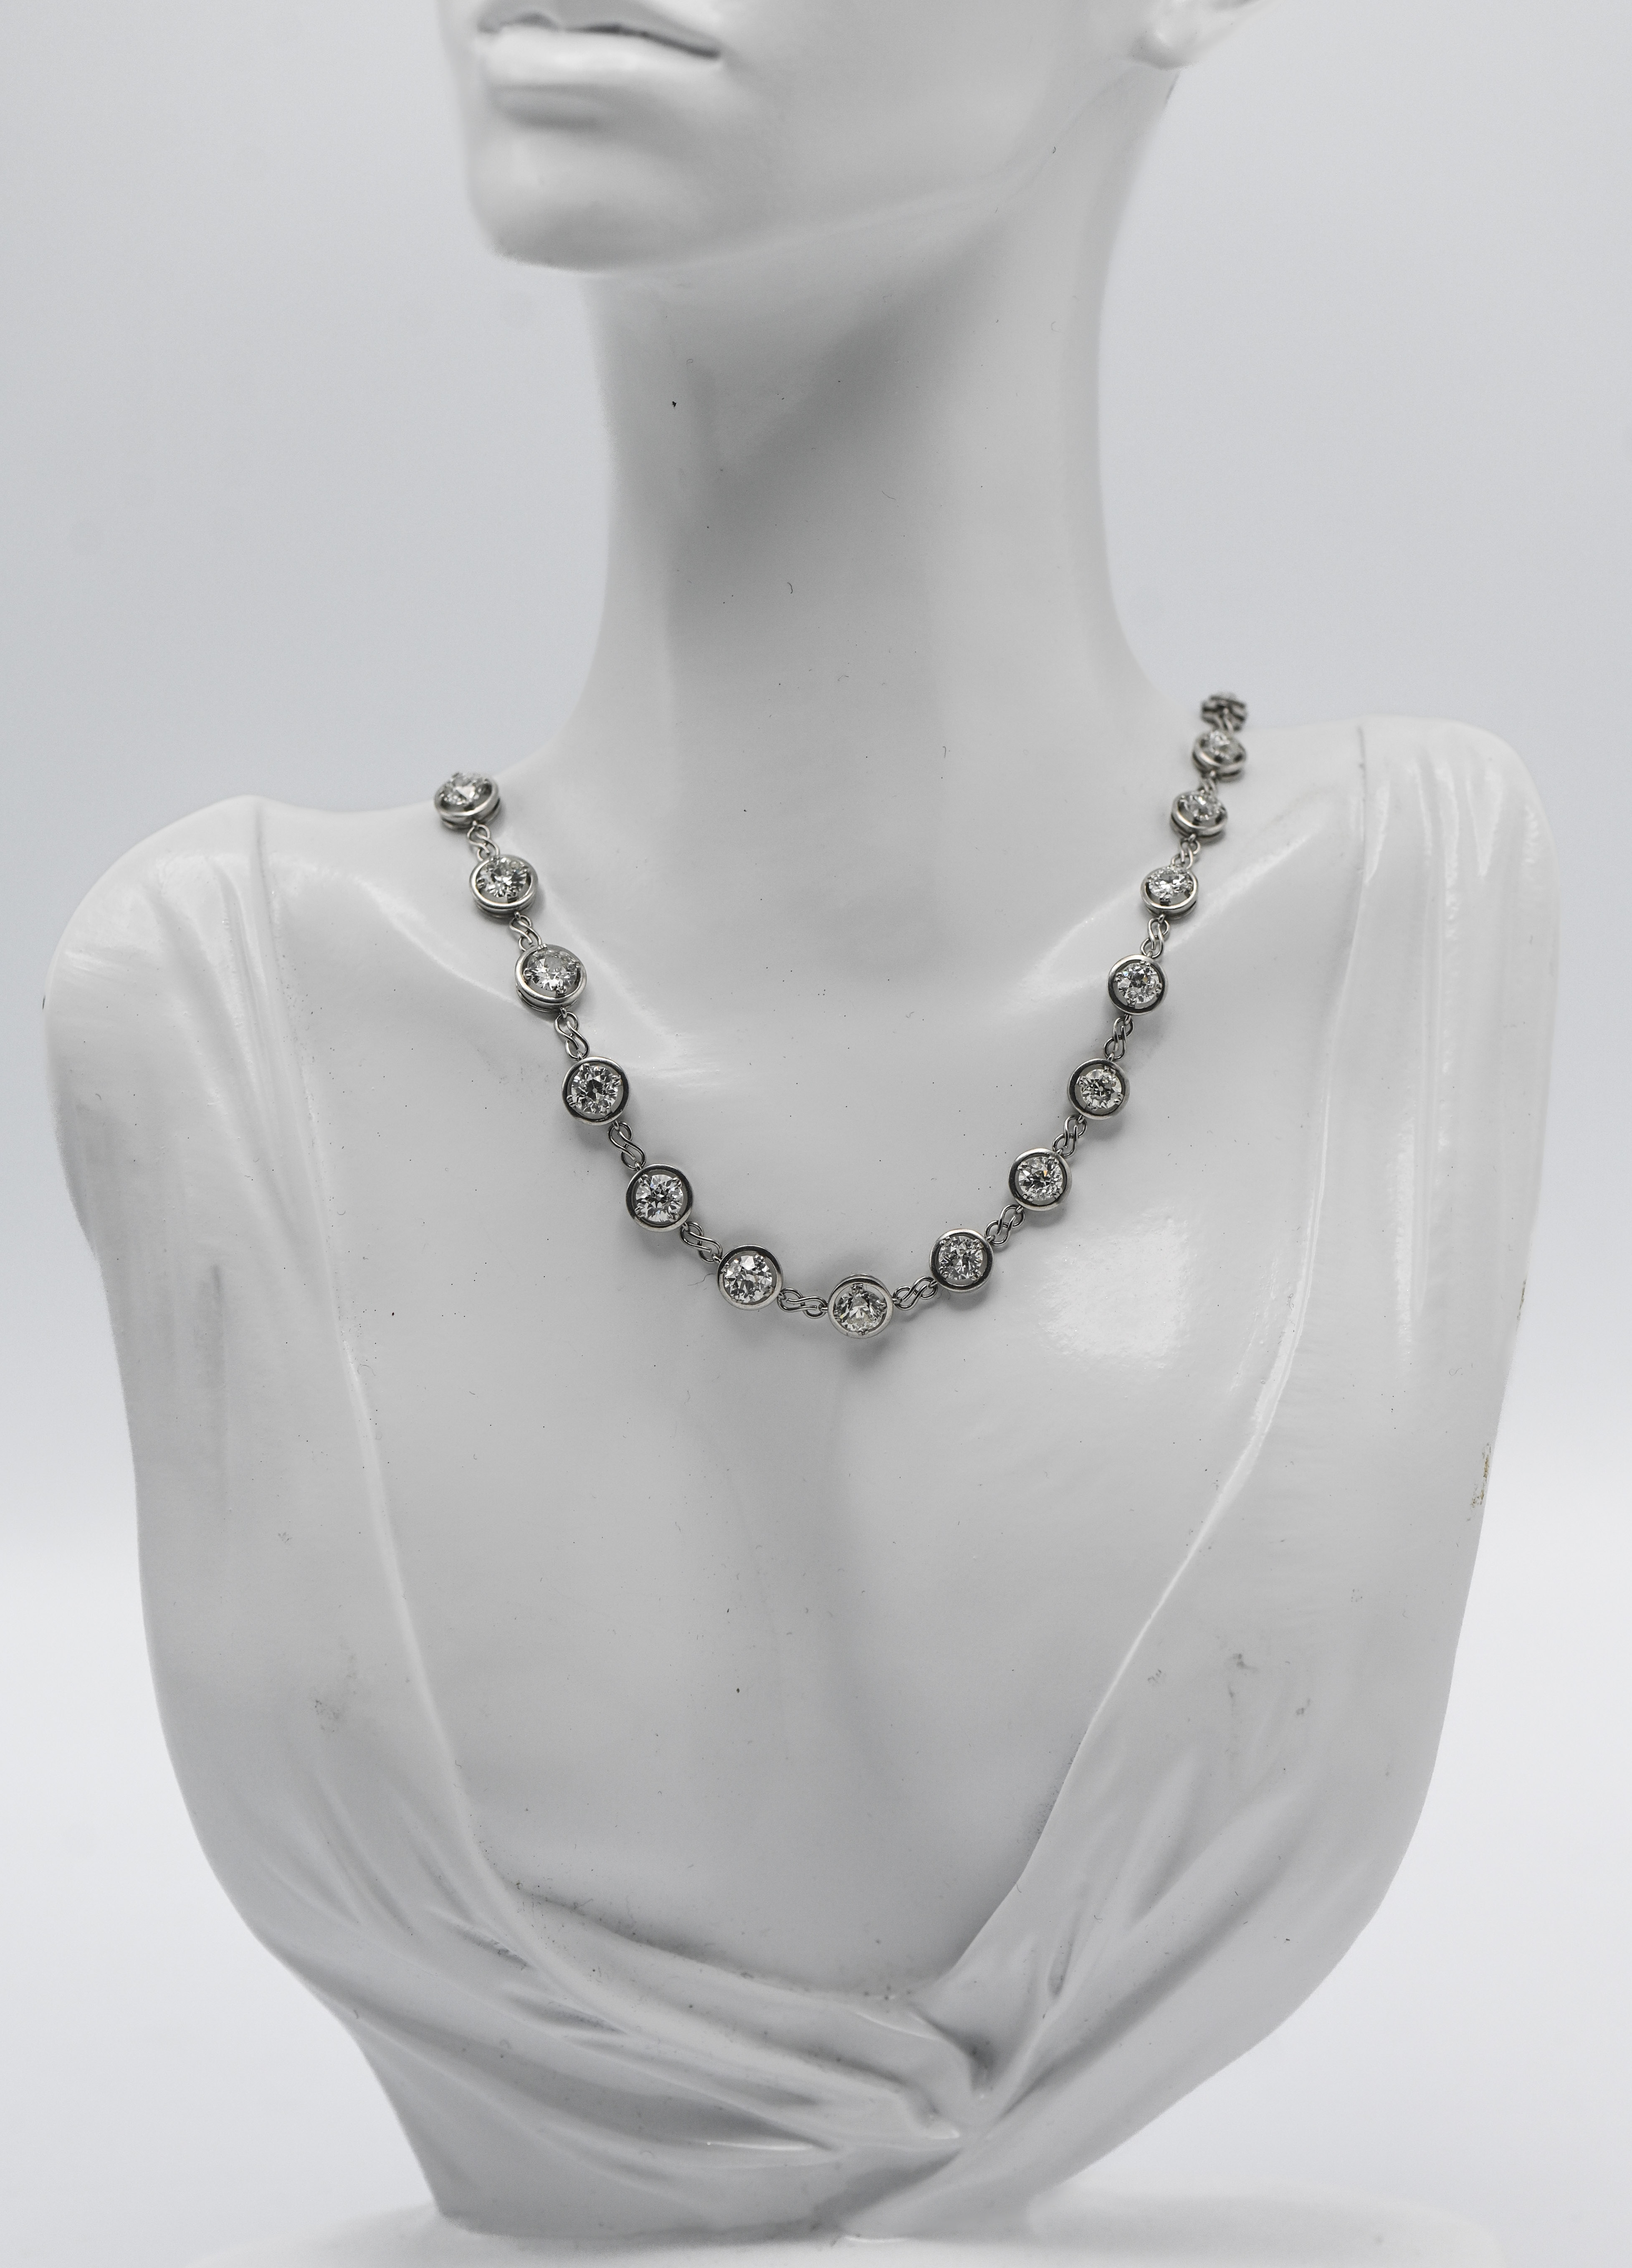 An stunning platinum and diamond set necklace, set with 30 diamonds weighing approx 14 carats, in